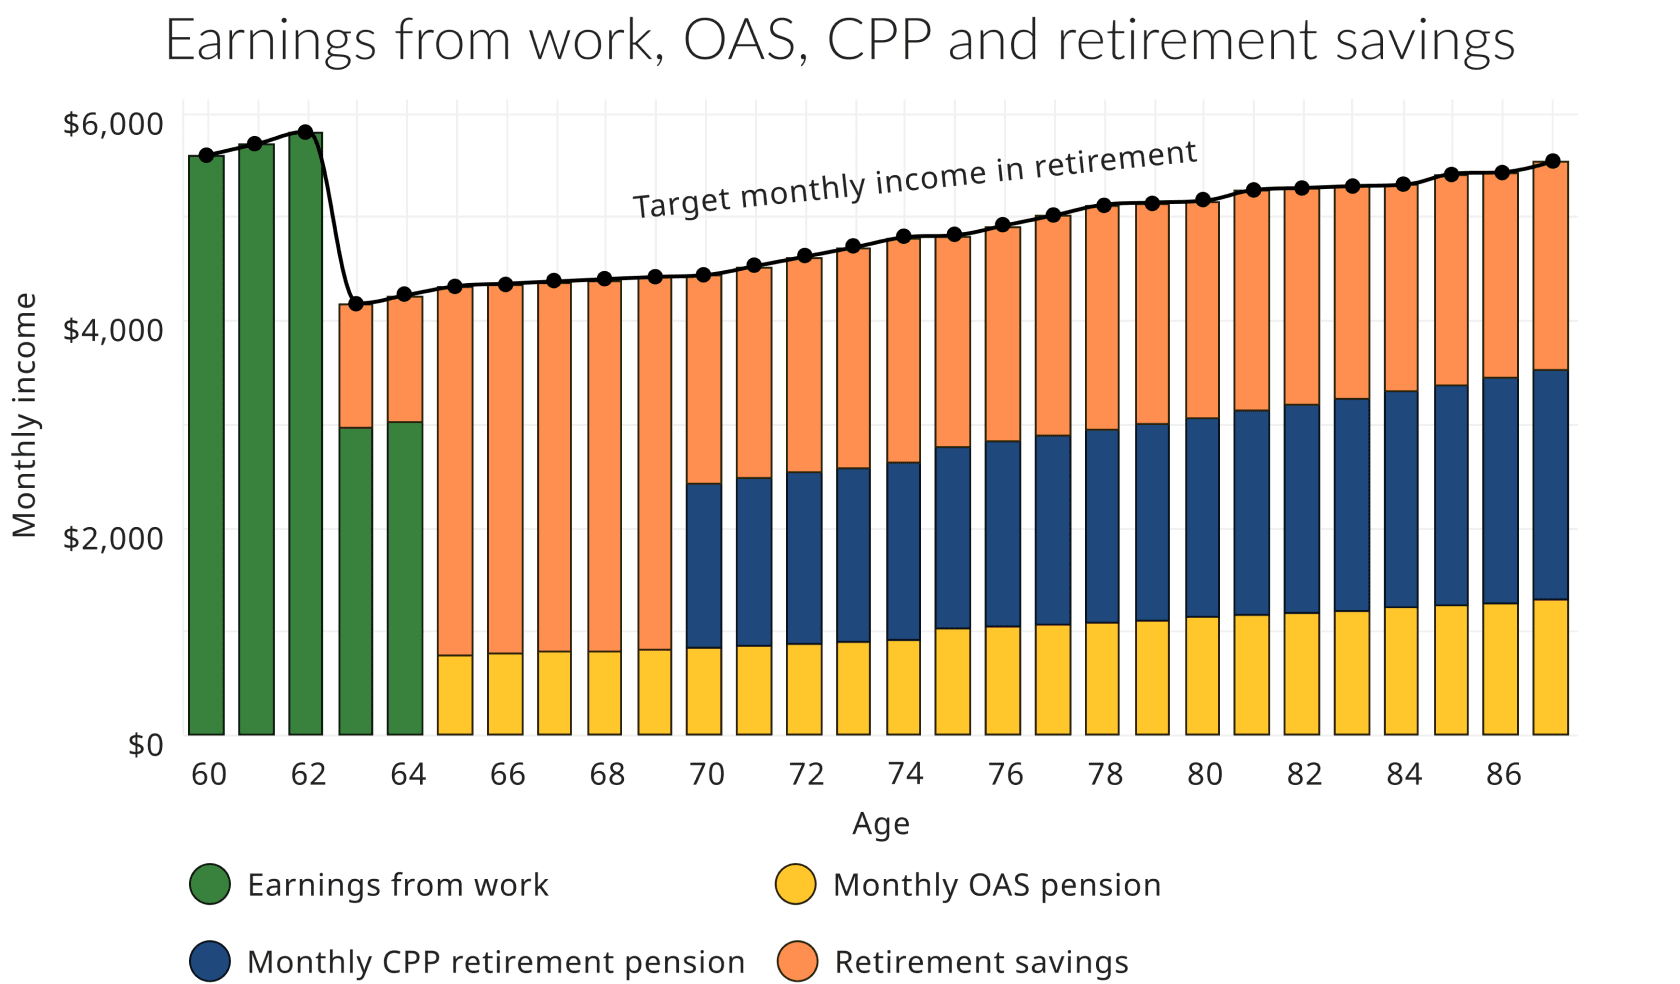 This chart shows all four sources of retirement income for Bonnie. She uses her earnings from work, both her public pensions, and her retirement savings to reach her target monthly income from ages 60 to 88. This chart shows Bonnie works full-time from ages 60 to 62. She then goes part-time from ages 63 to 64 and her earnings are half of what they used to be. Bonnie uses some of her retirement savings to reach her target monthly income. Bonnie fully retires at age 65 and uses her retirement savings and the OAS pension to reach her target monthly income until age 70. From ages 70 to 88, Bonnie uses all her income sources including her CPP retirement pension to reach her target monthly income. The graph shows that from ages 70 to 88 the CPP retirement pension and retirement savings make up the most of her retirement income. If her CPP starts at age 70, Bonnie needs to have <strong>$528,000</strong> in private savings after tax to cover the gap.